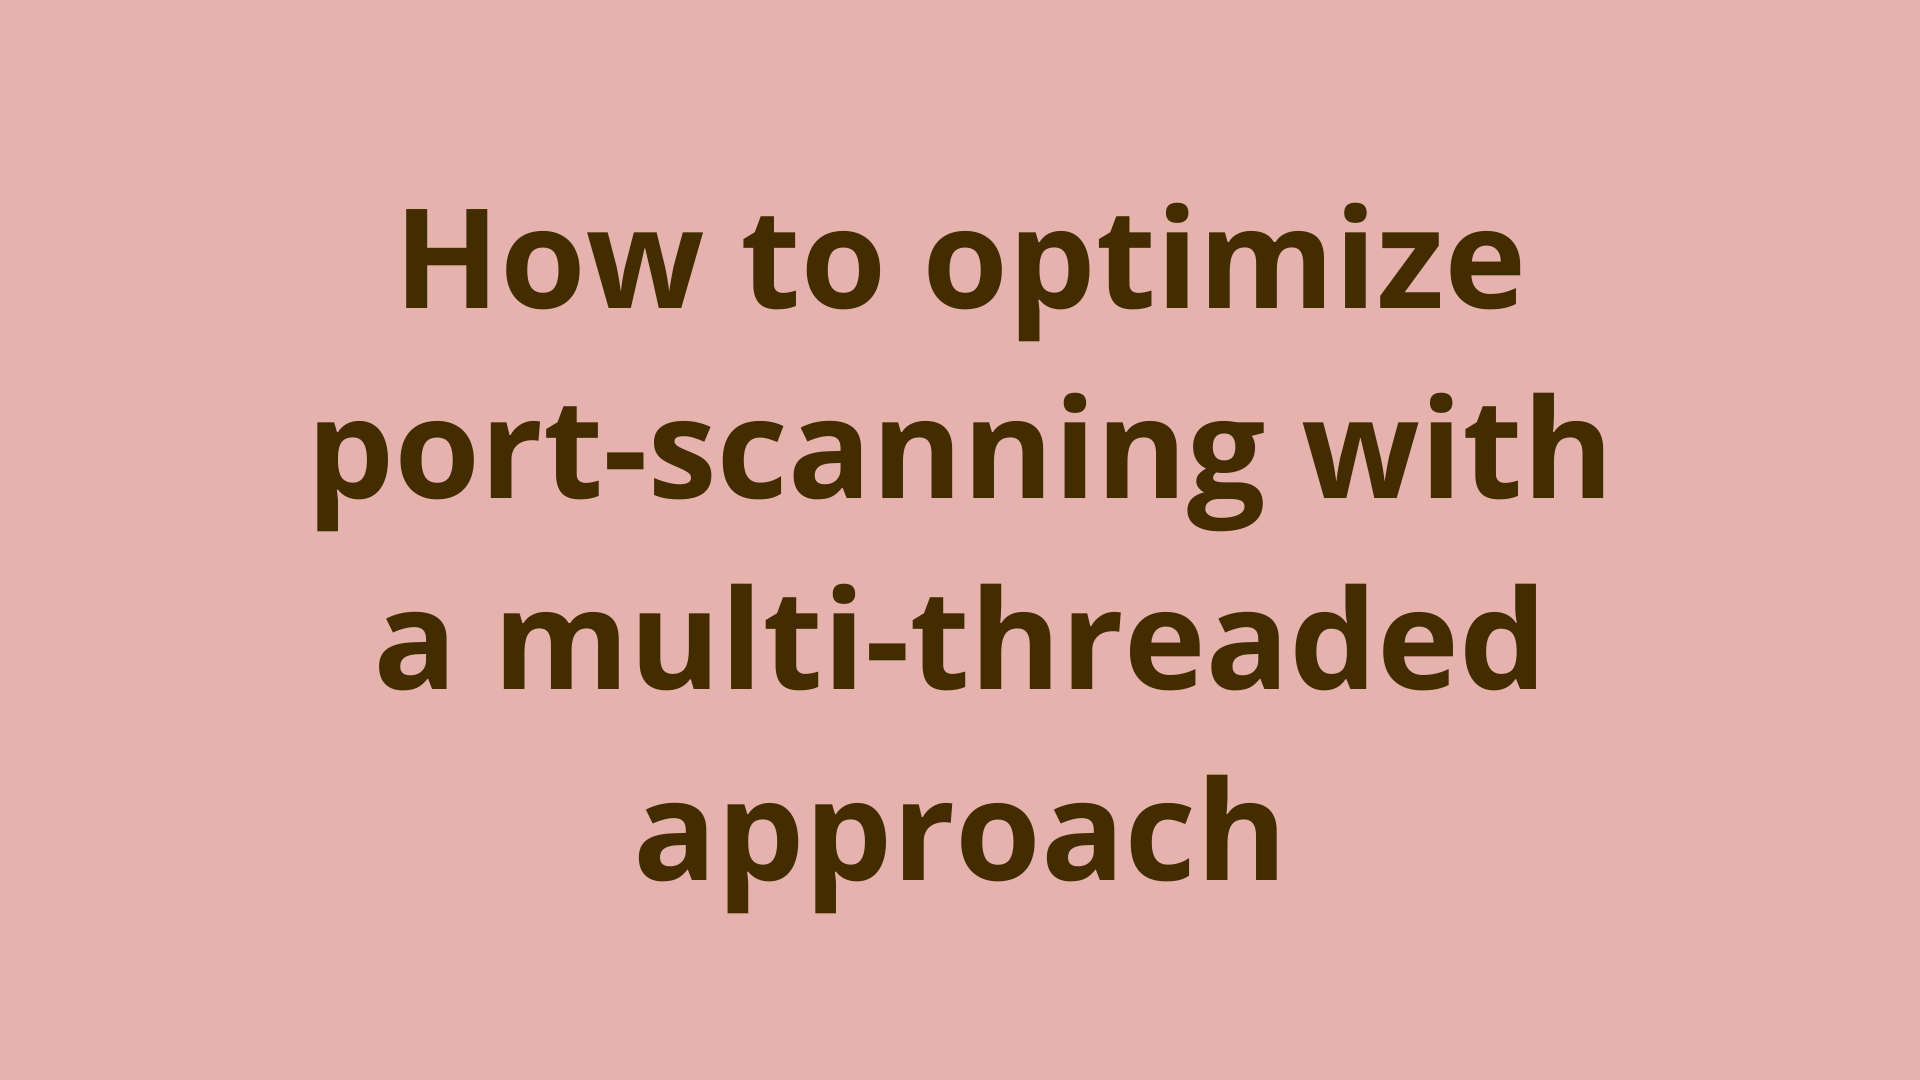 Image of How to optimize port-scanning with a multi-threaded approach